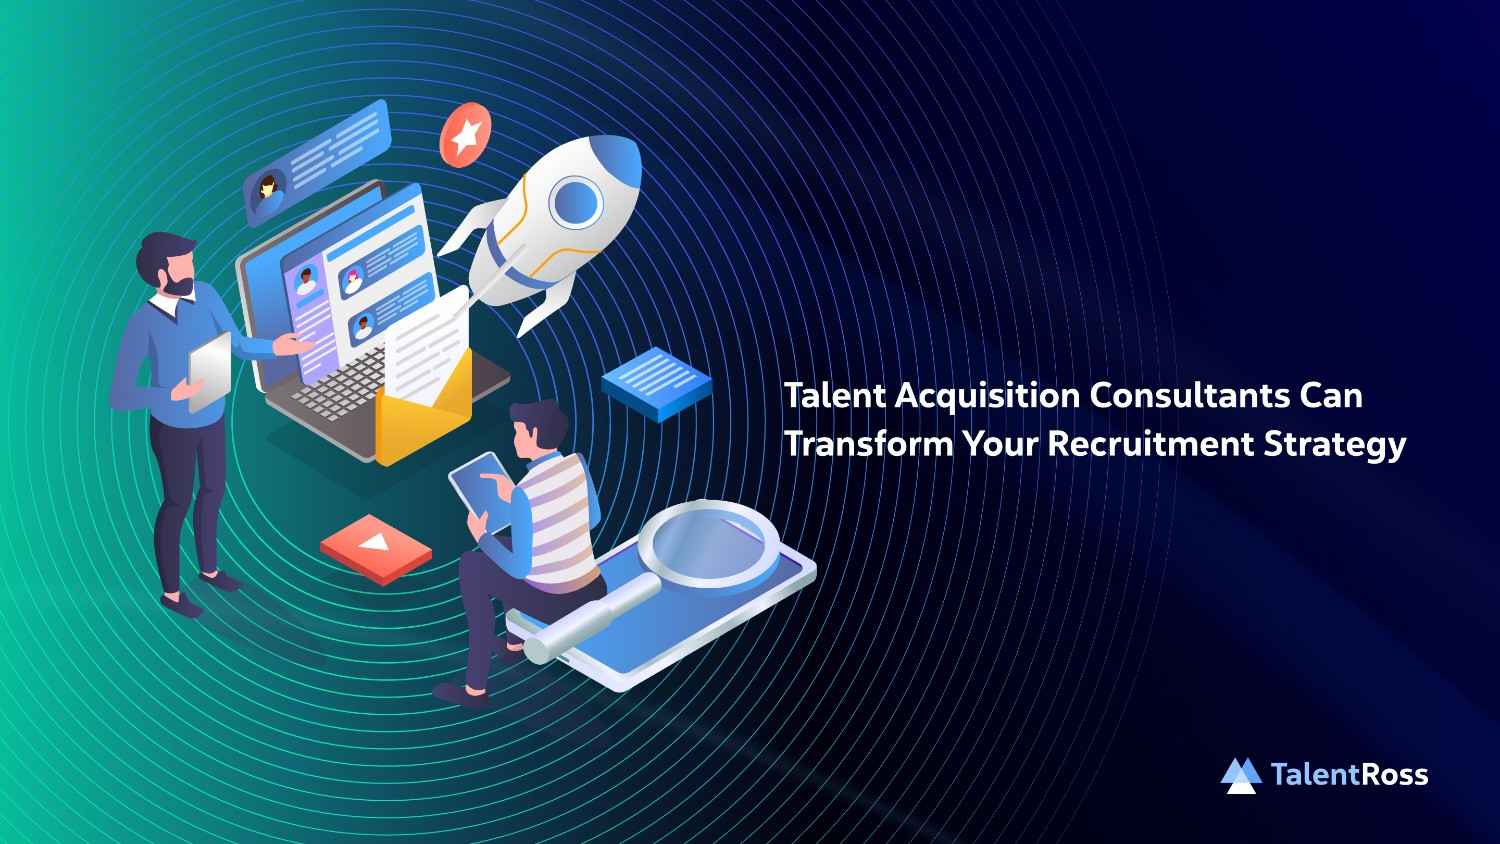 Ways Talent Acquisition Consultants Can Transform Your Recruitment Strategy